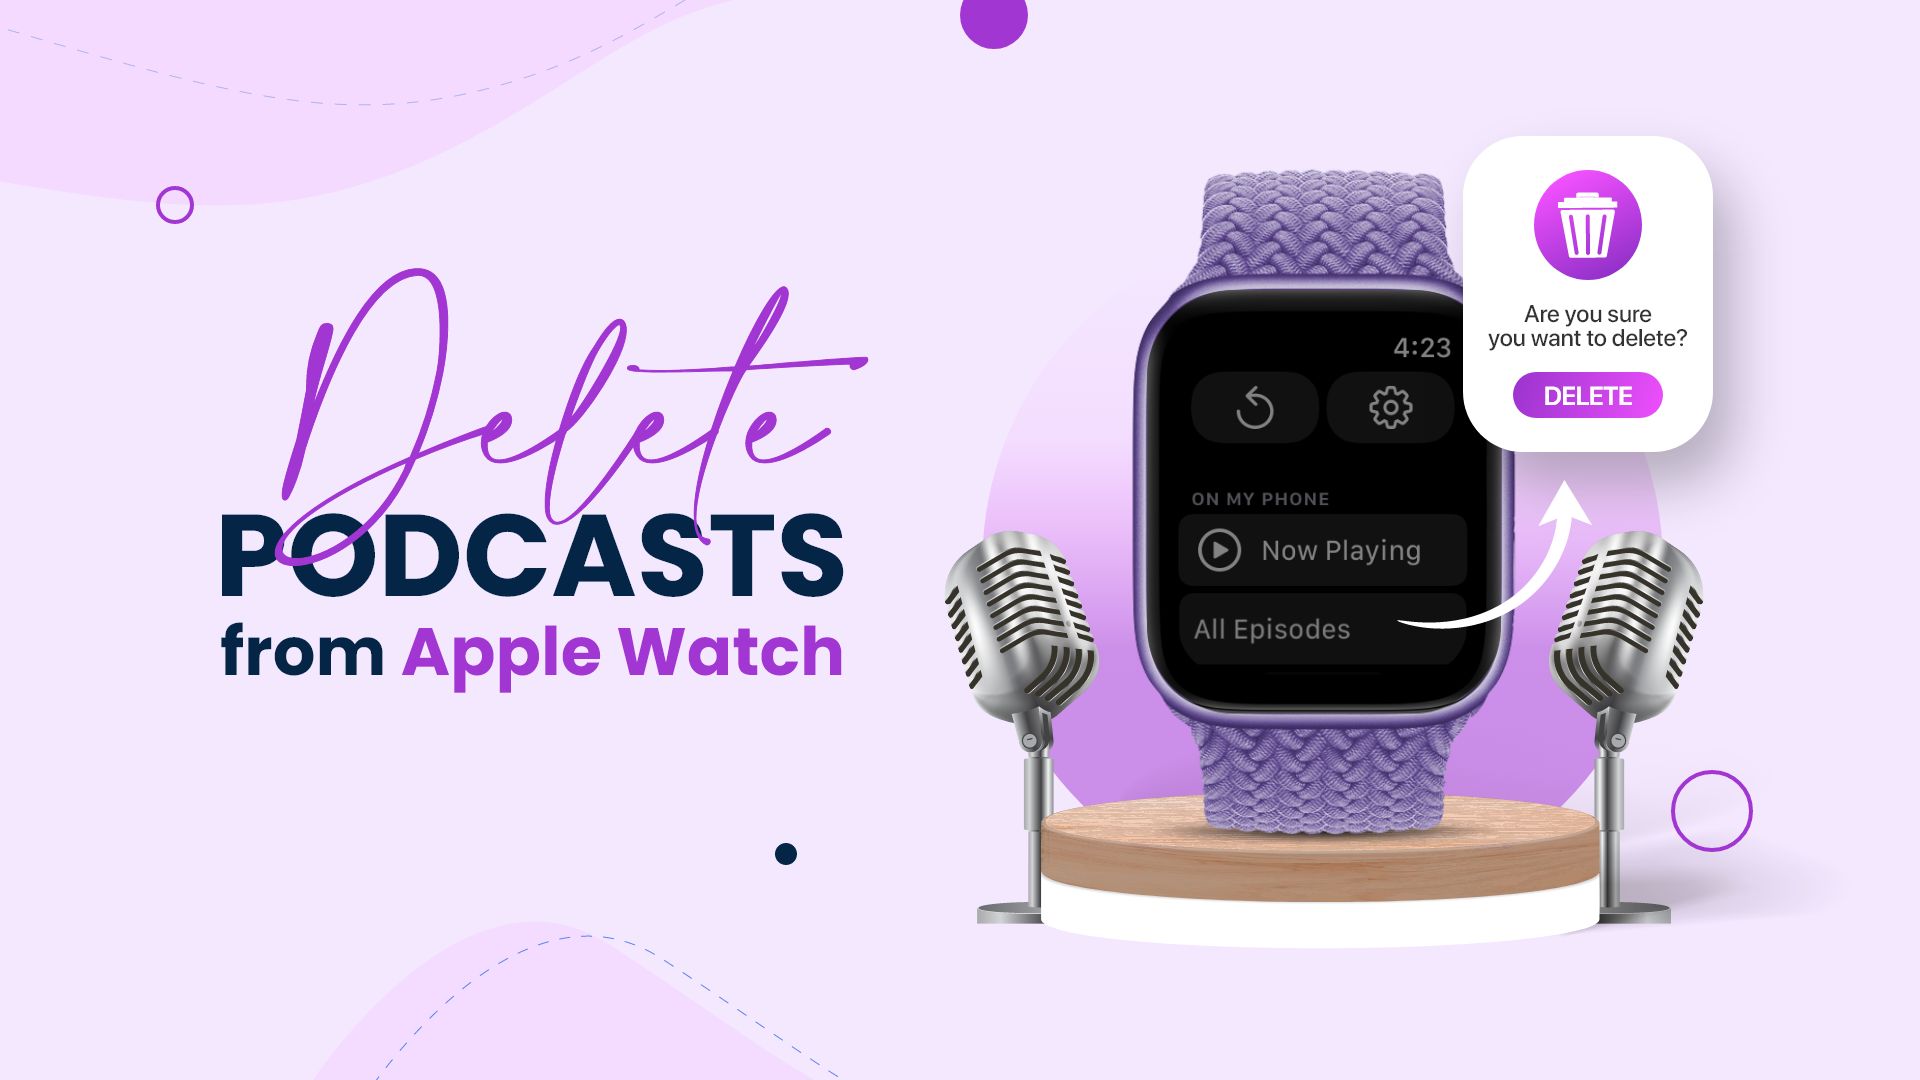 How to Delete Podcasts from Apple Watch